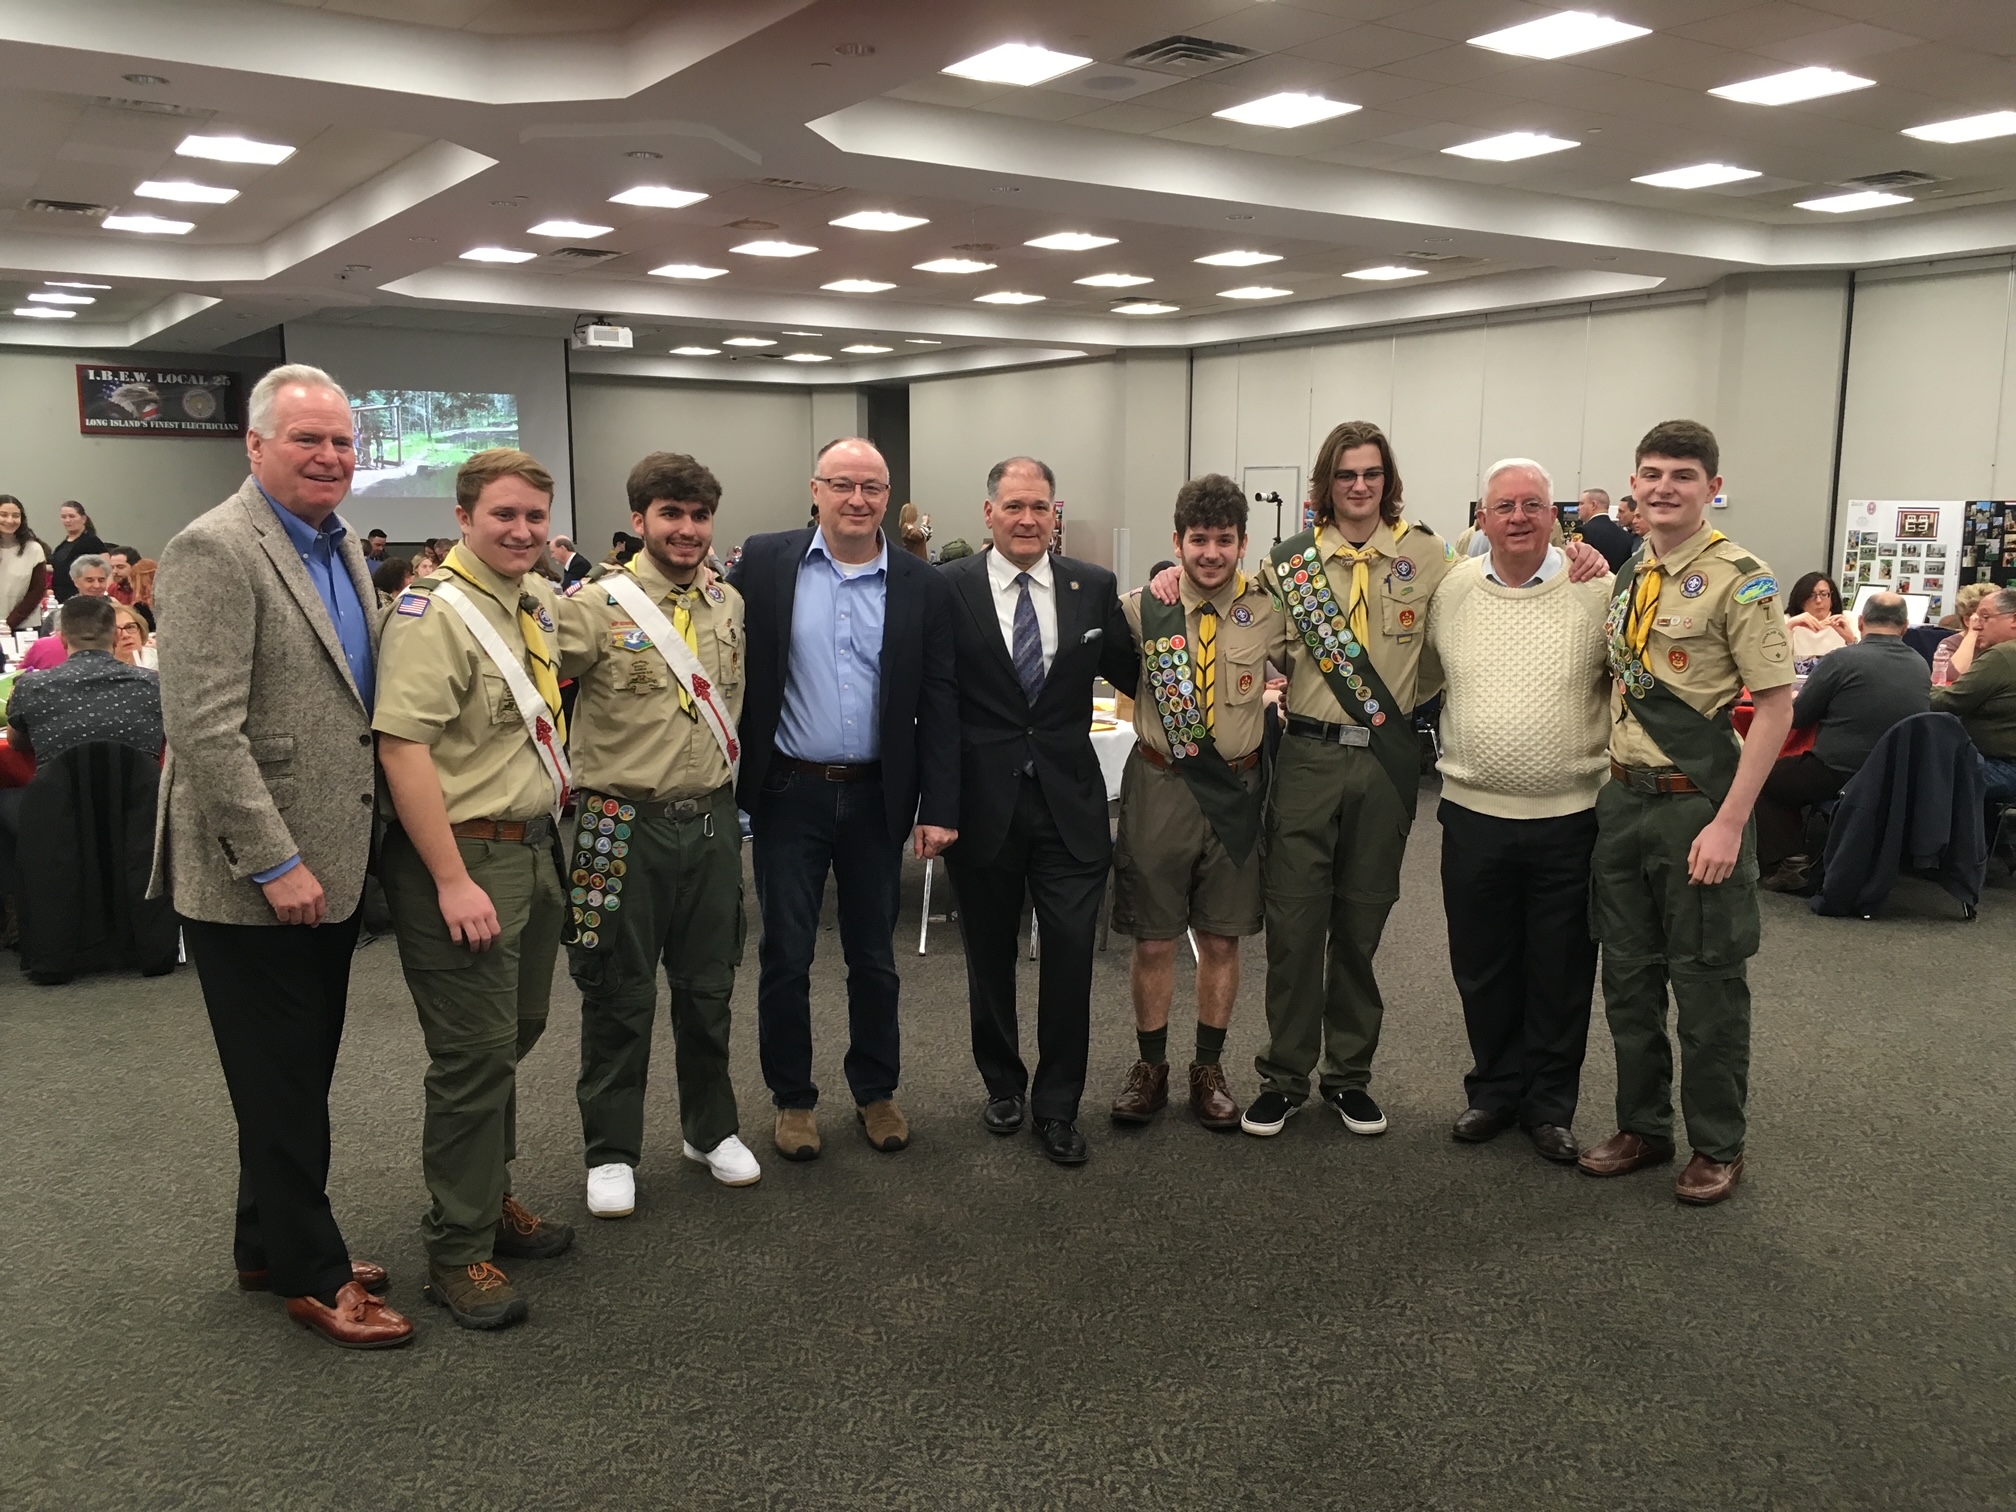 an eagle scout ceremony